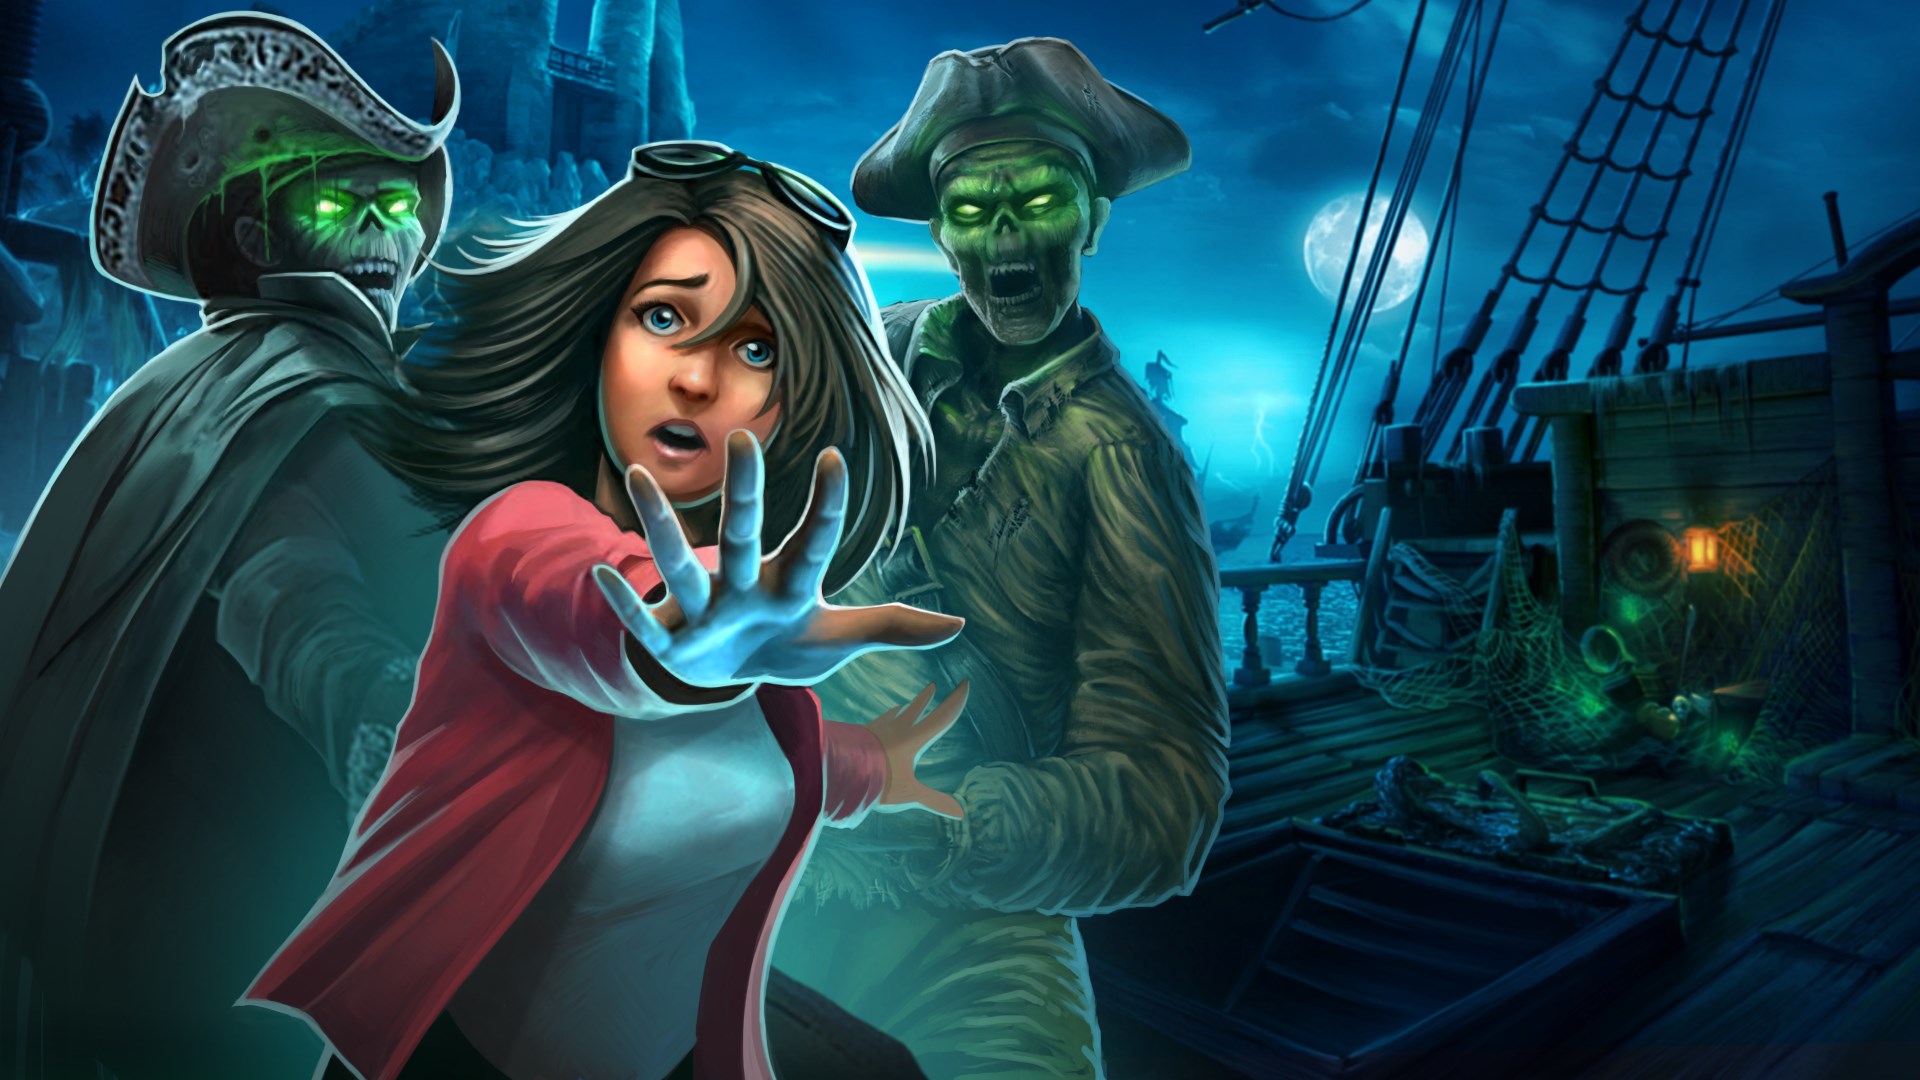 Buy Nightmares From The Deep The Cursed Heart Microsoft Store En Ca